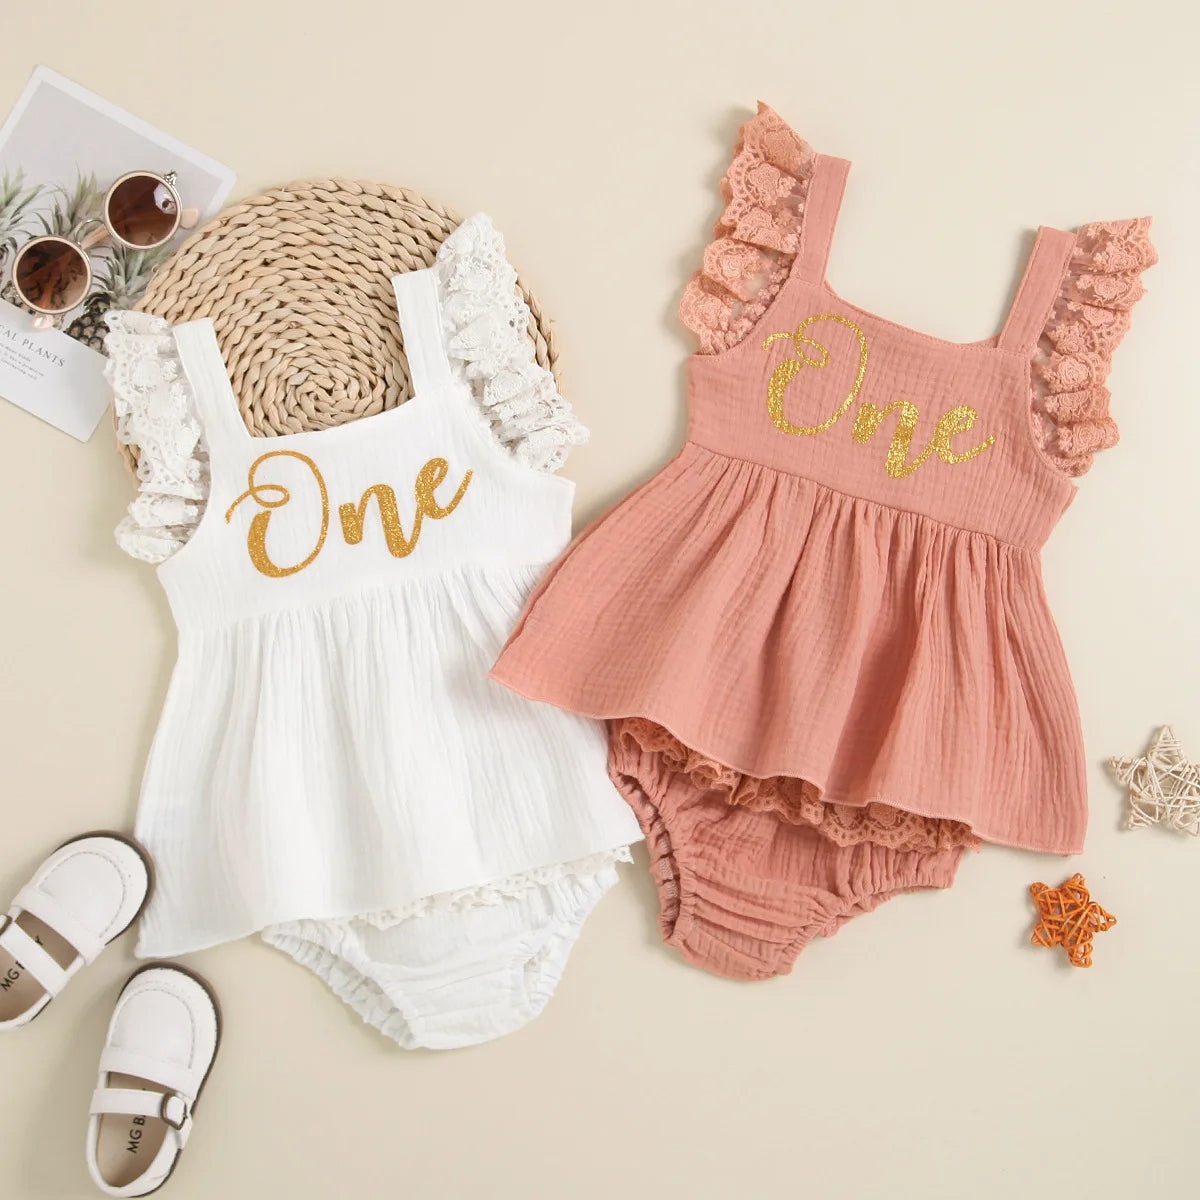 Girls' short solid-color dress, sleeveless, with ruffled shoulder straps, golden print and short ruffled pants, two-piece set